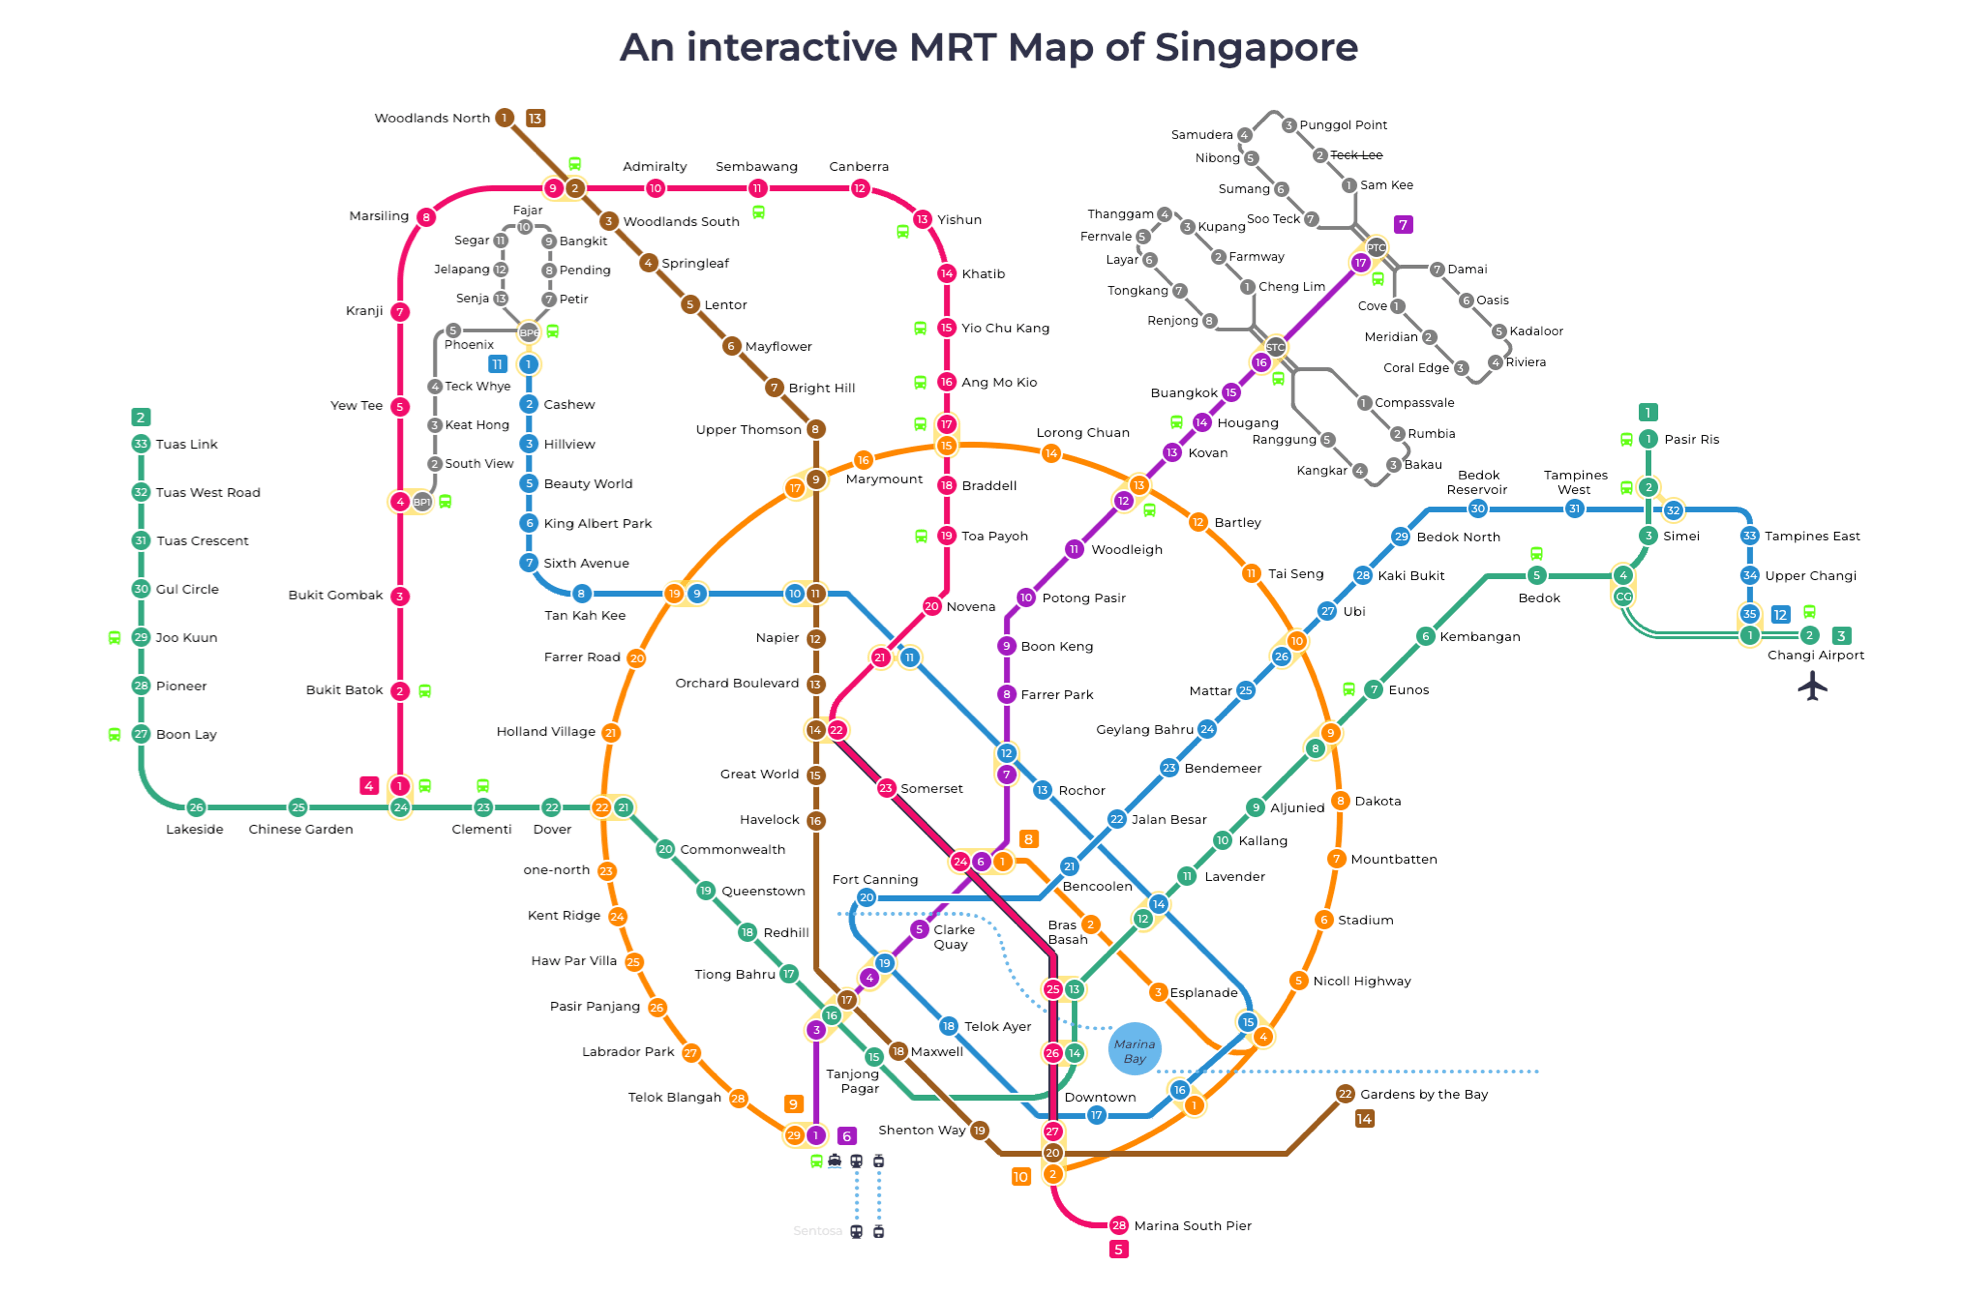 Light mode image caption of the interactive MRT map